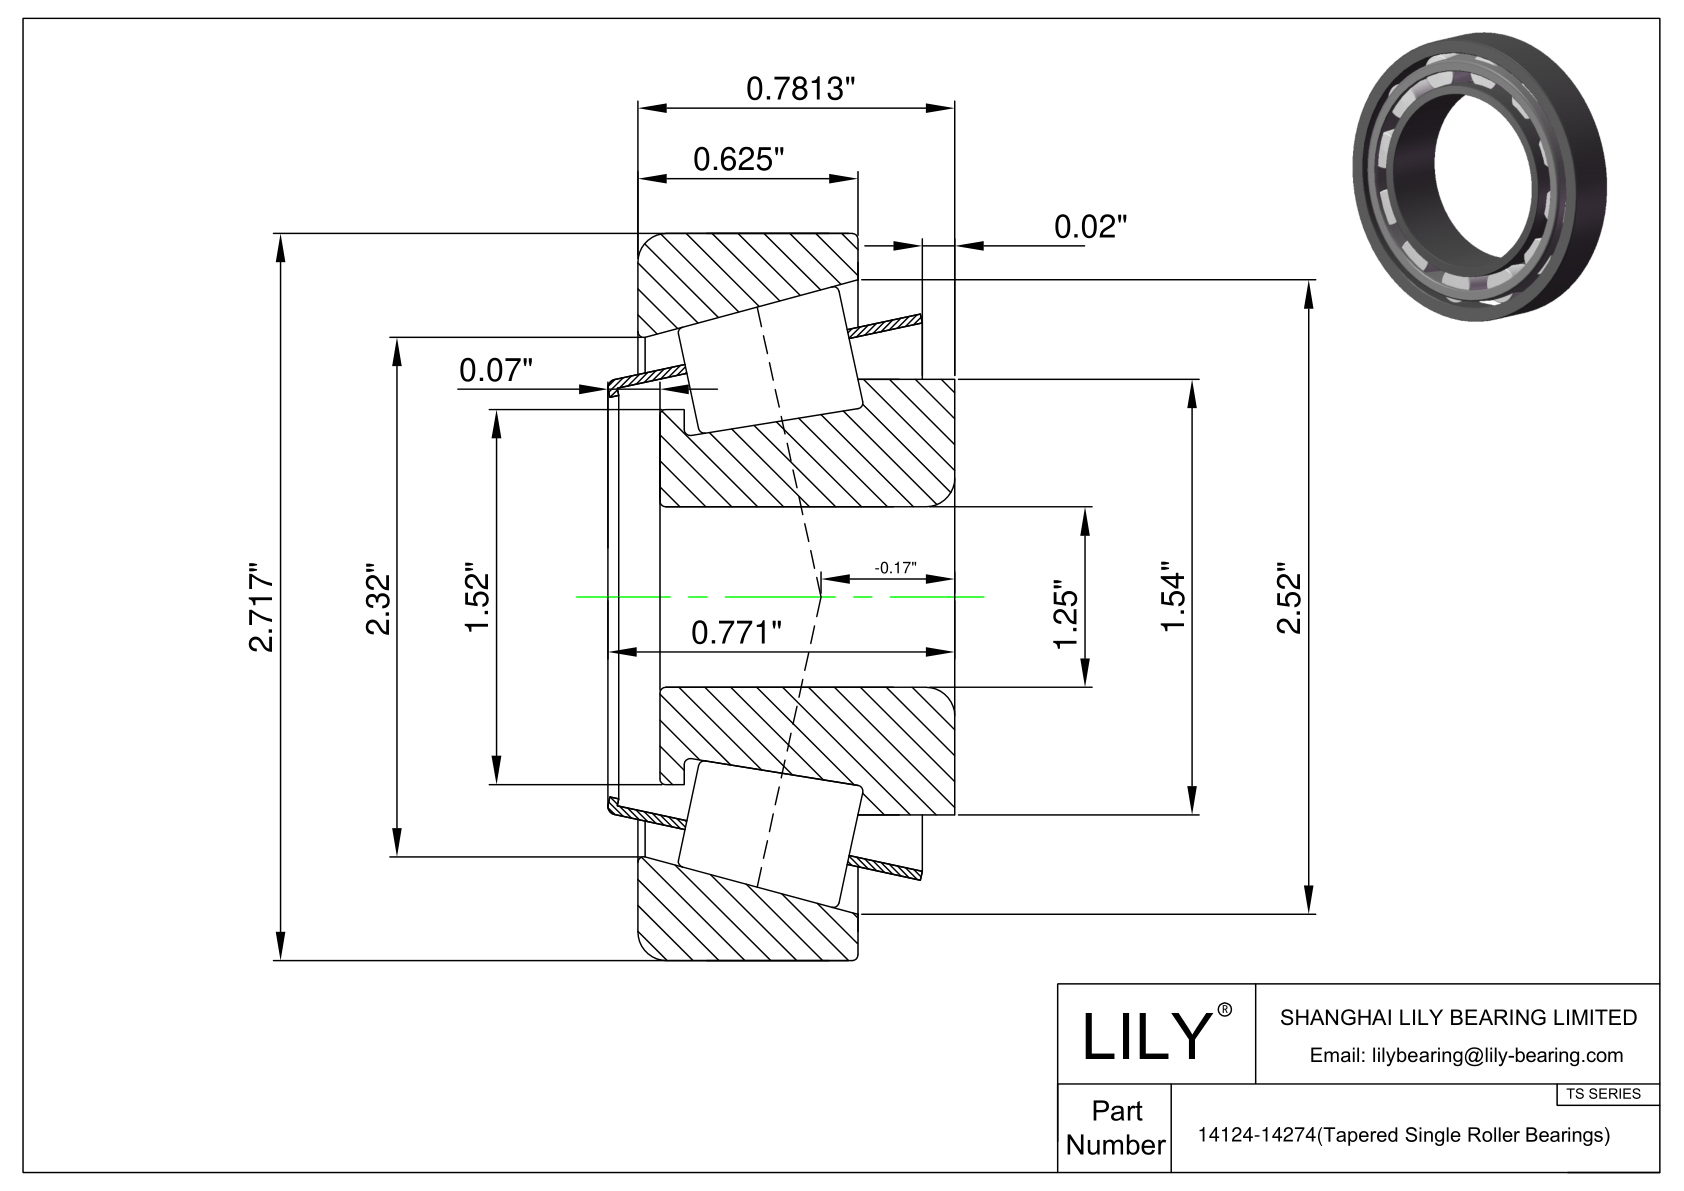 14124-14274 TS (Tapered Single Roller Bearings) (Imperial) cad drawing